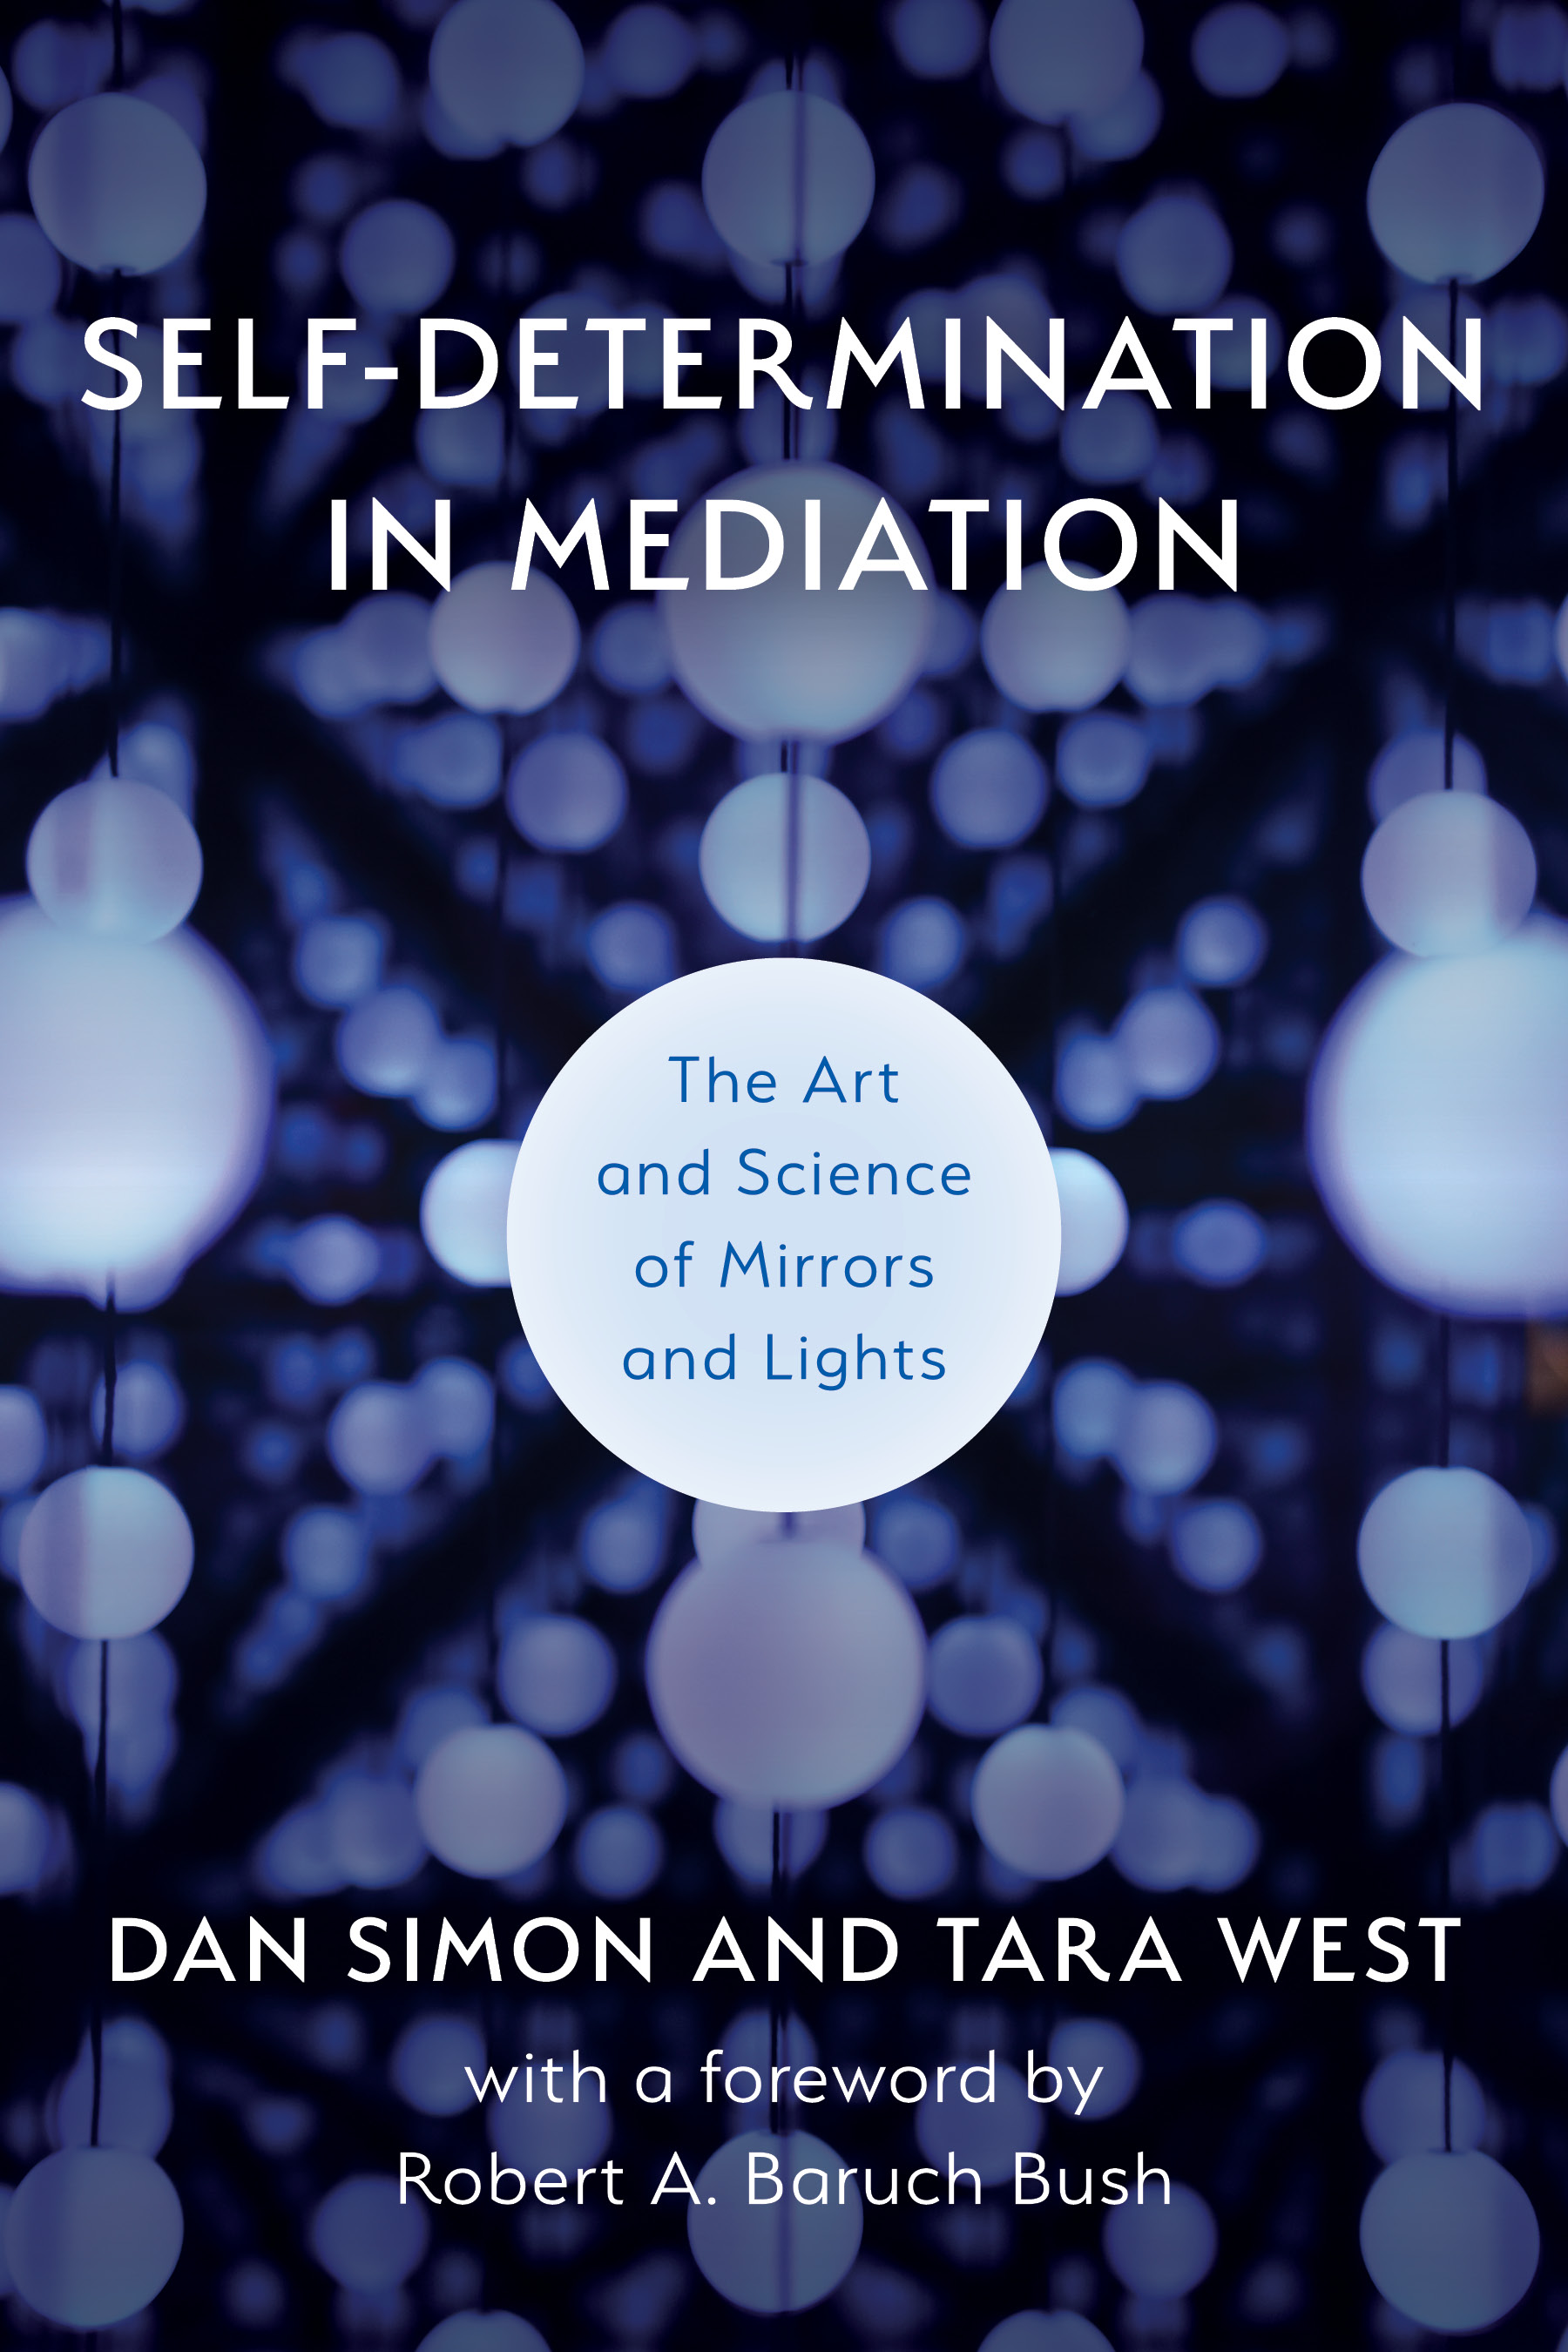 Self-Determination in Mediation: The Art and Science of Mirrors and Lights